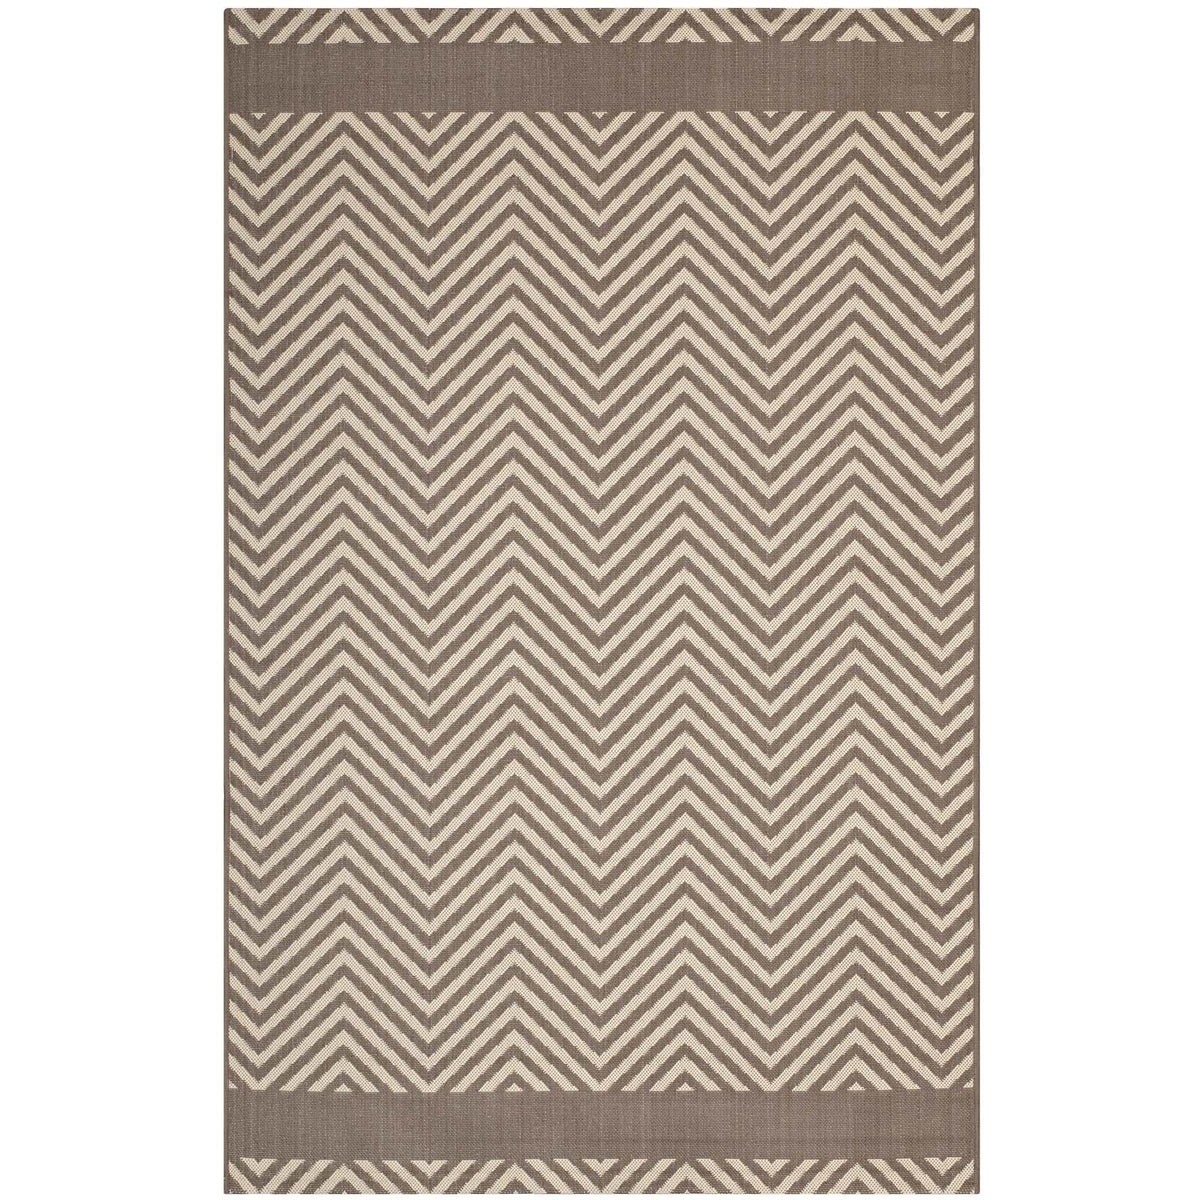 Modway Furniture Modern Optica Chevron With End Borders 8x10 Indoor and Outdoor Area Rug - R-1141-810